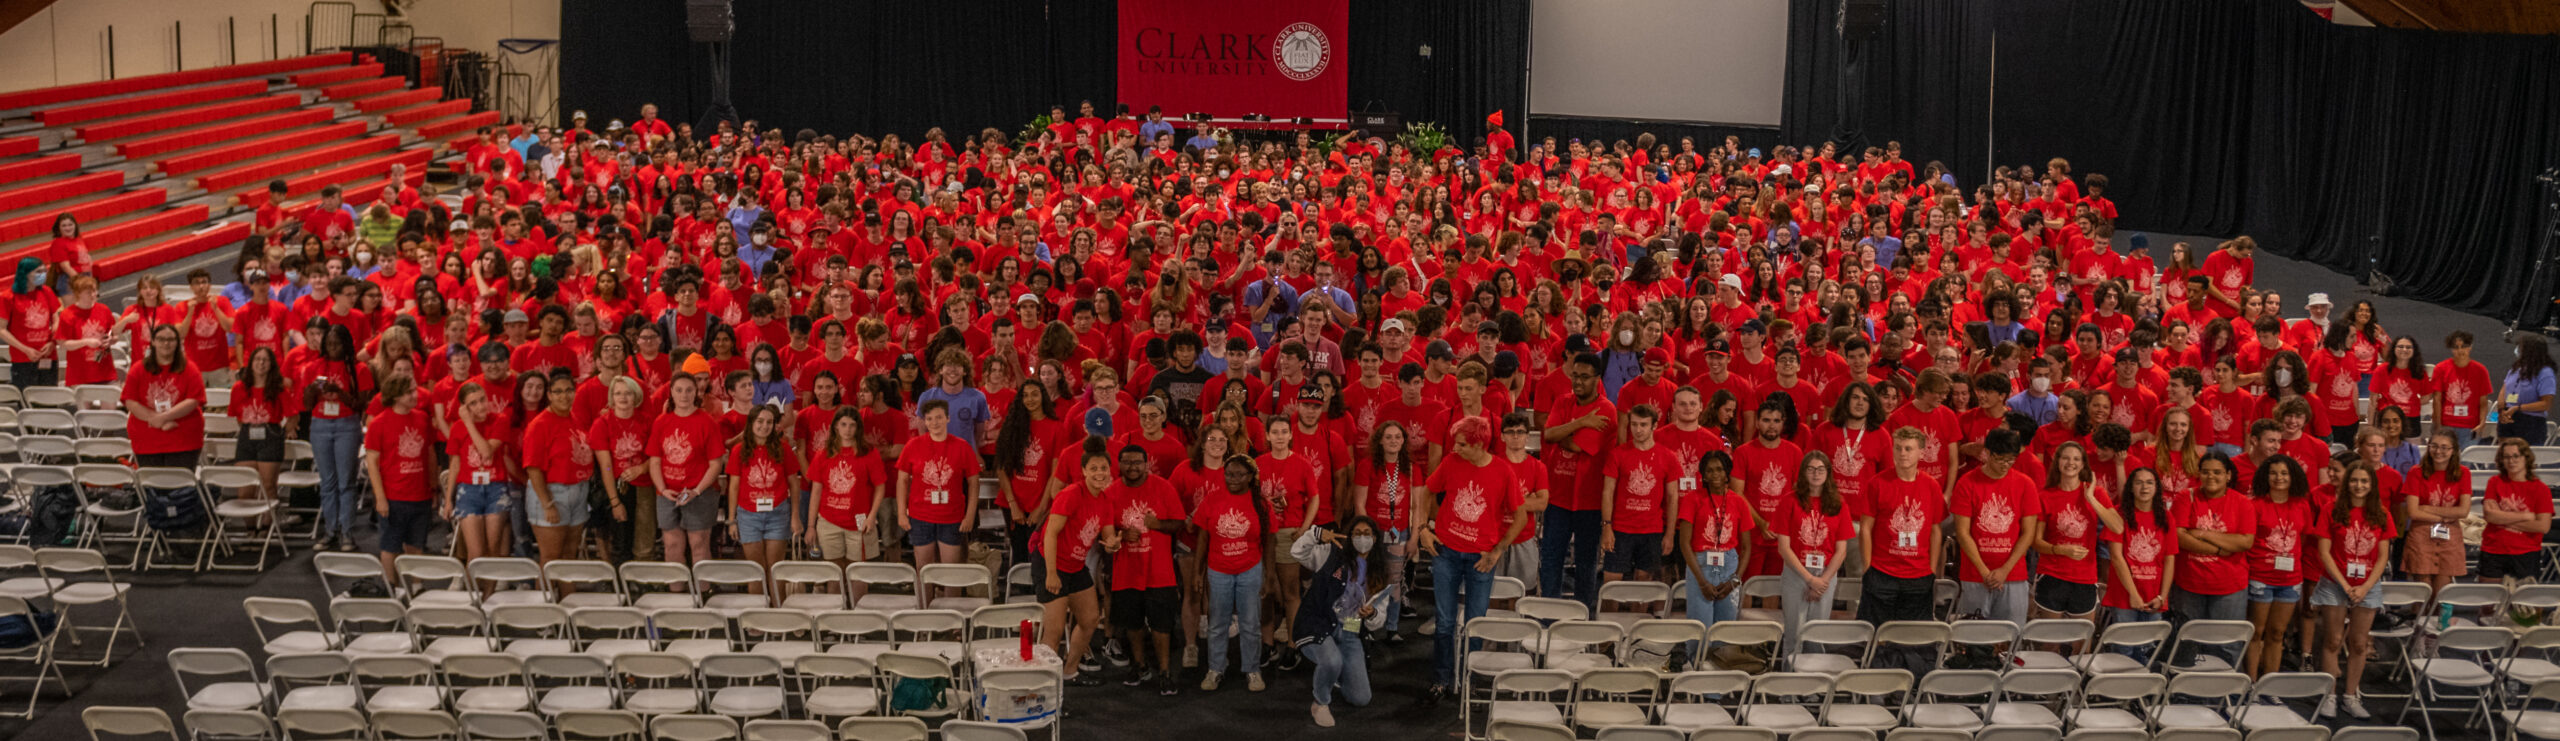 Class of 2026 in red T-shirts